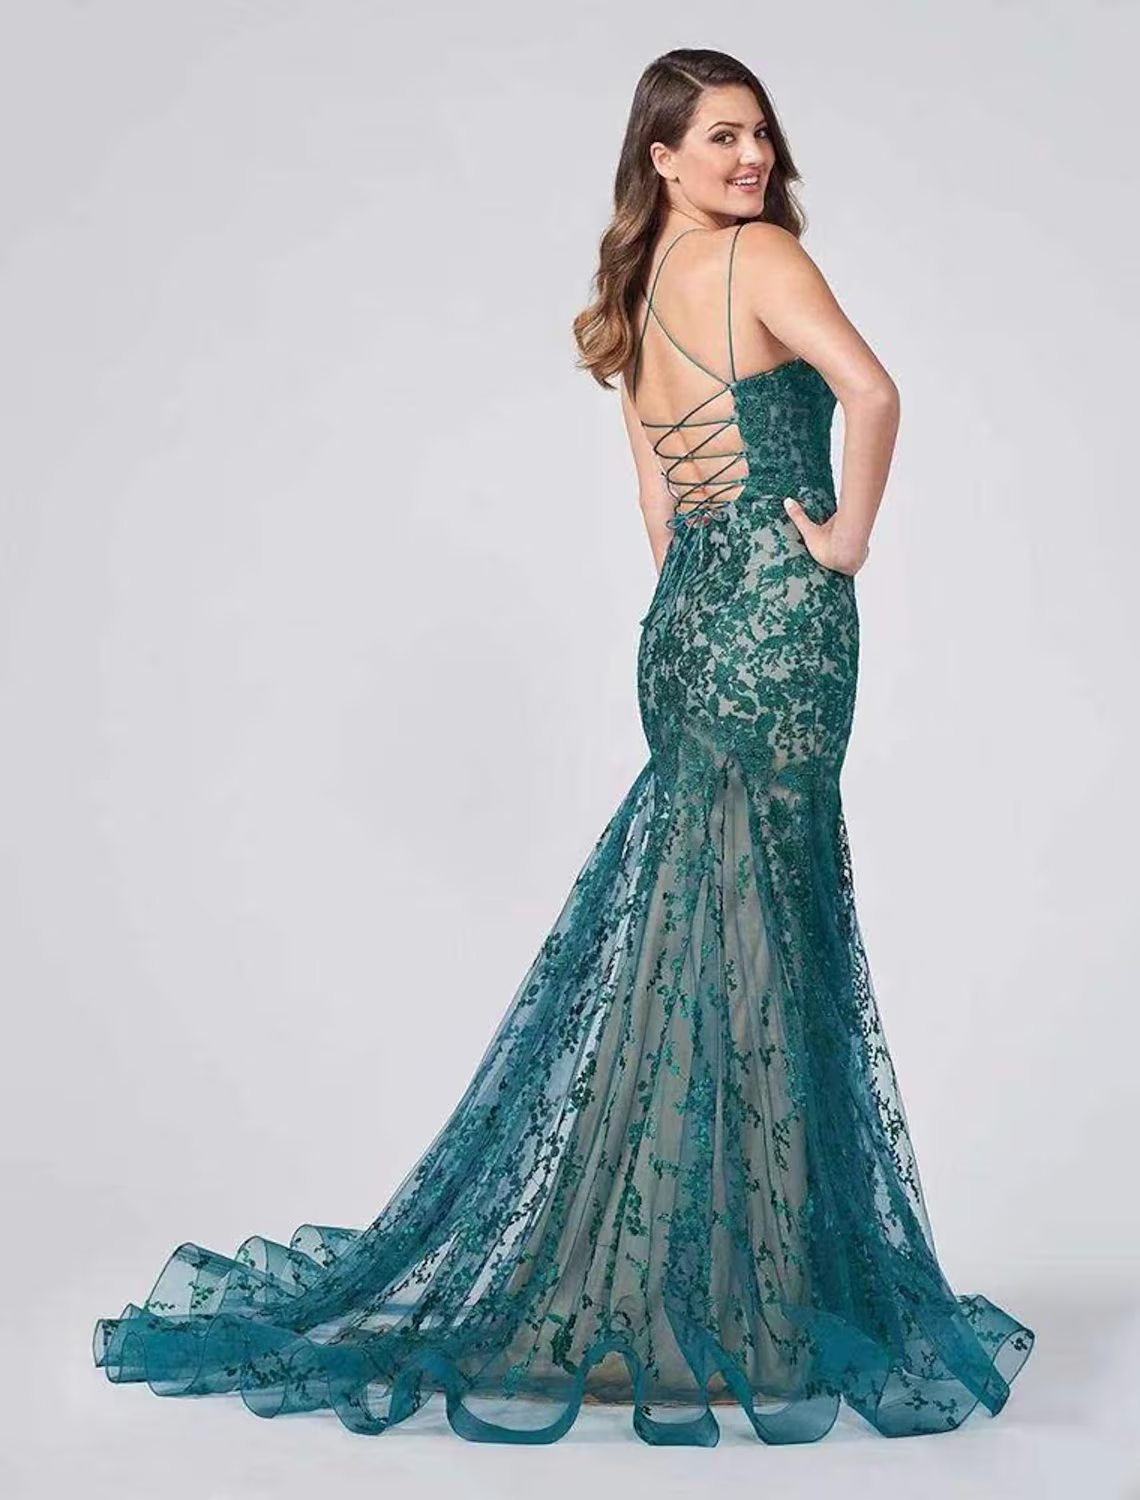 Evening Gown Color Block Dress Formal Court Train Sleeveless Strap Lace Backless with Appliques